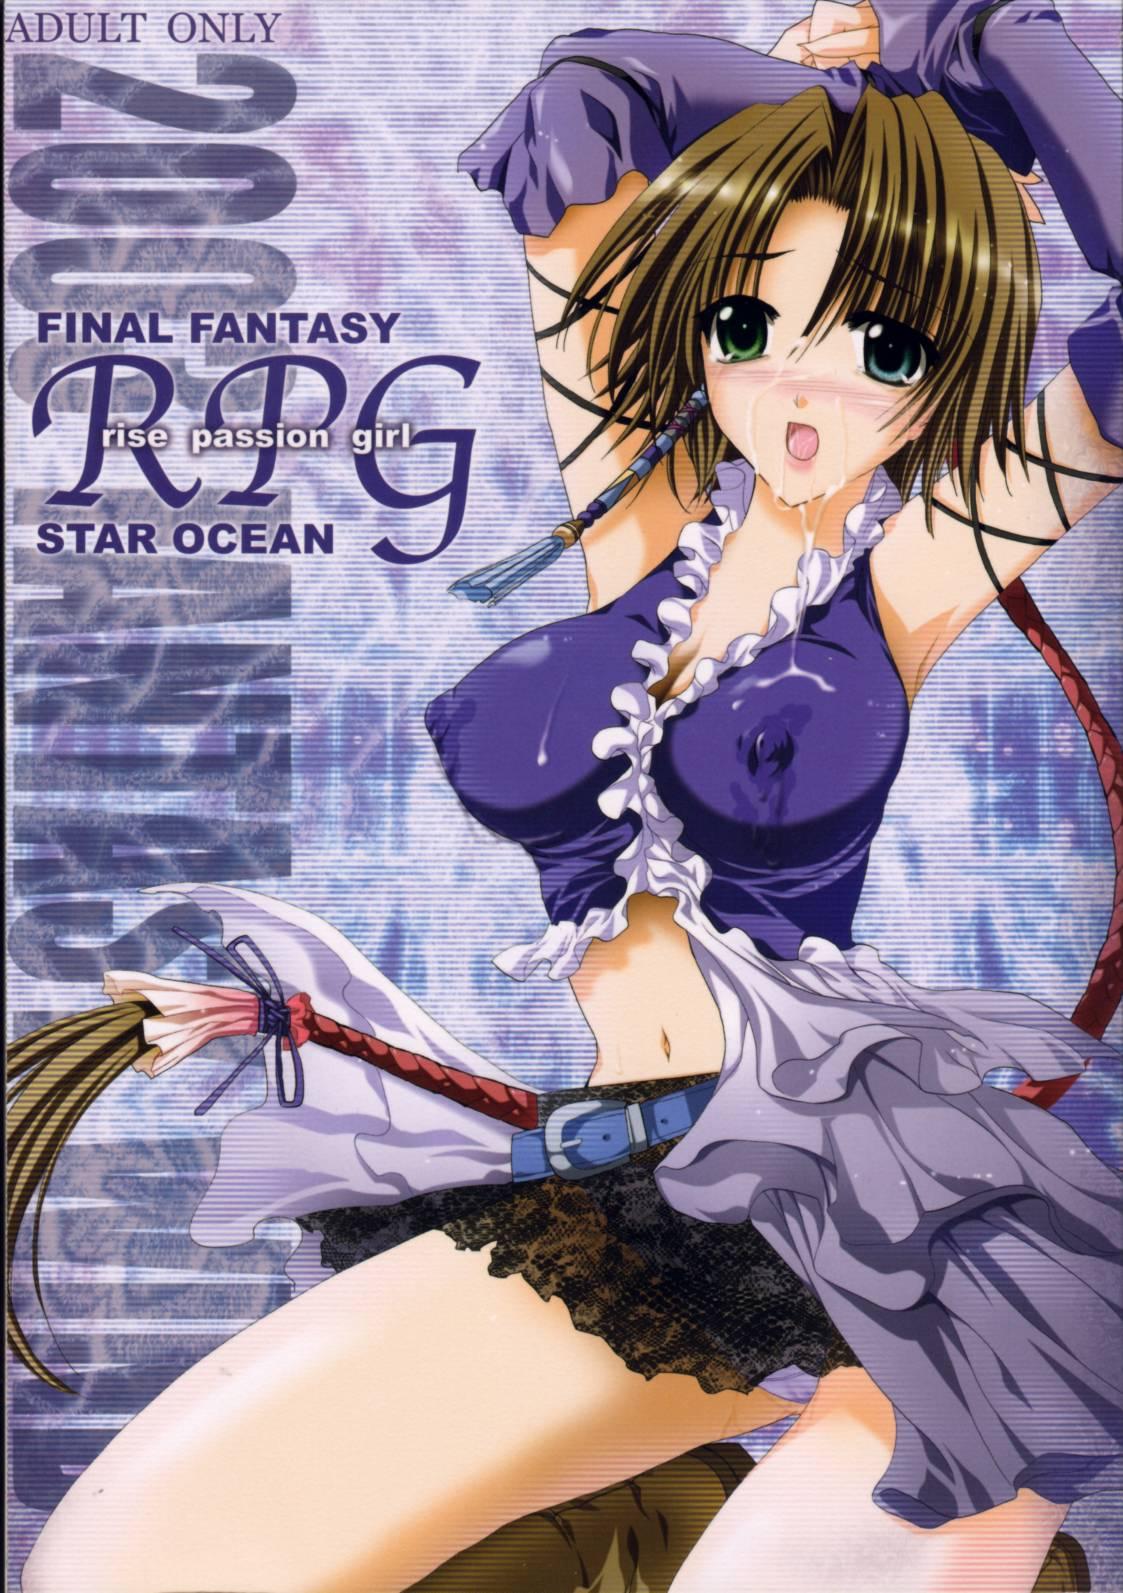 RPG - Rise Passion Girl 0